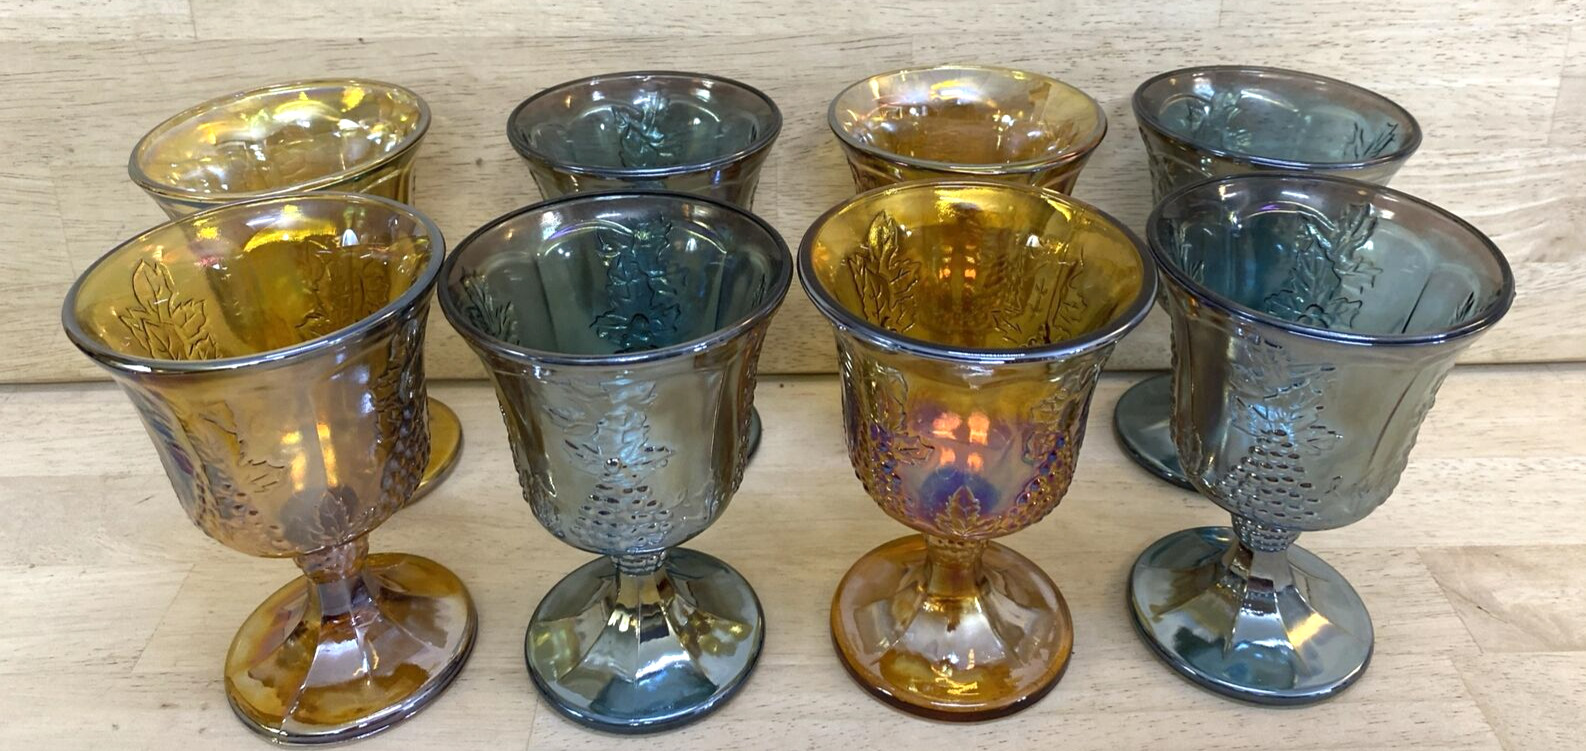 8 GLASS GOBLETS Iridescent Carnival 4 Blue & 4 Amber Grape Vintage Mixed Lot